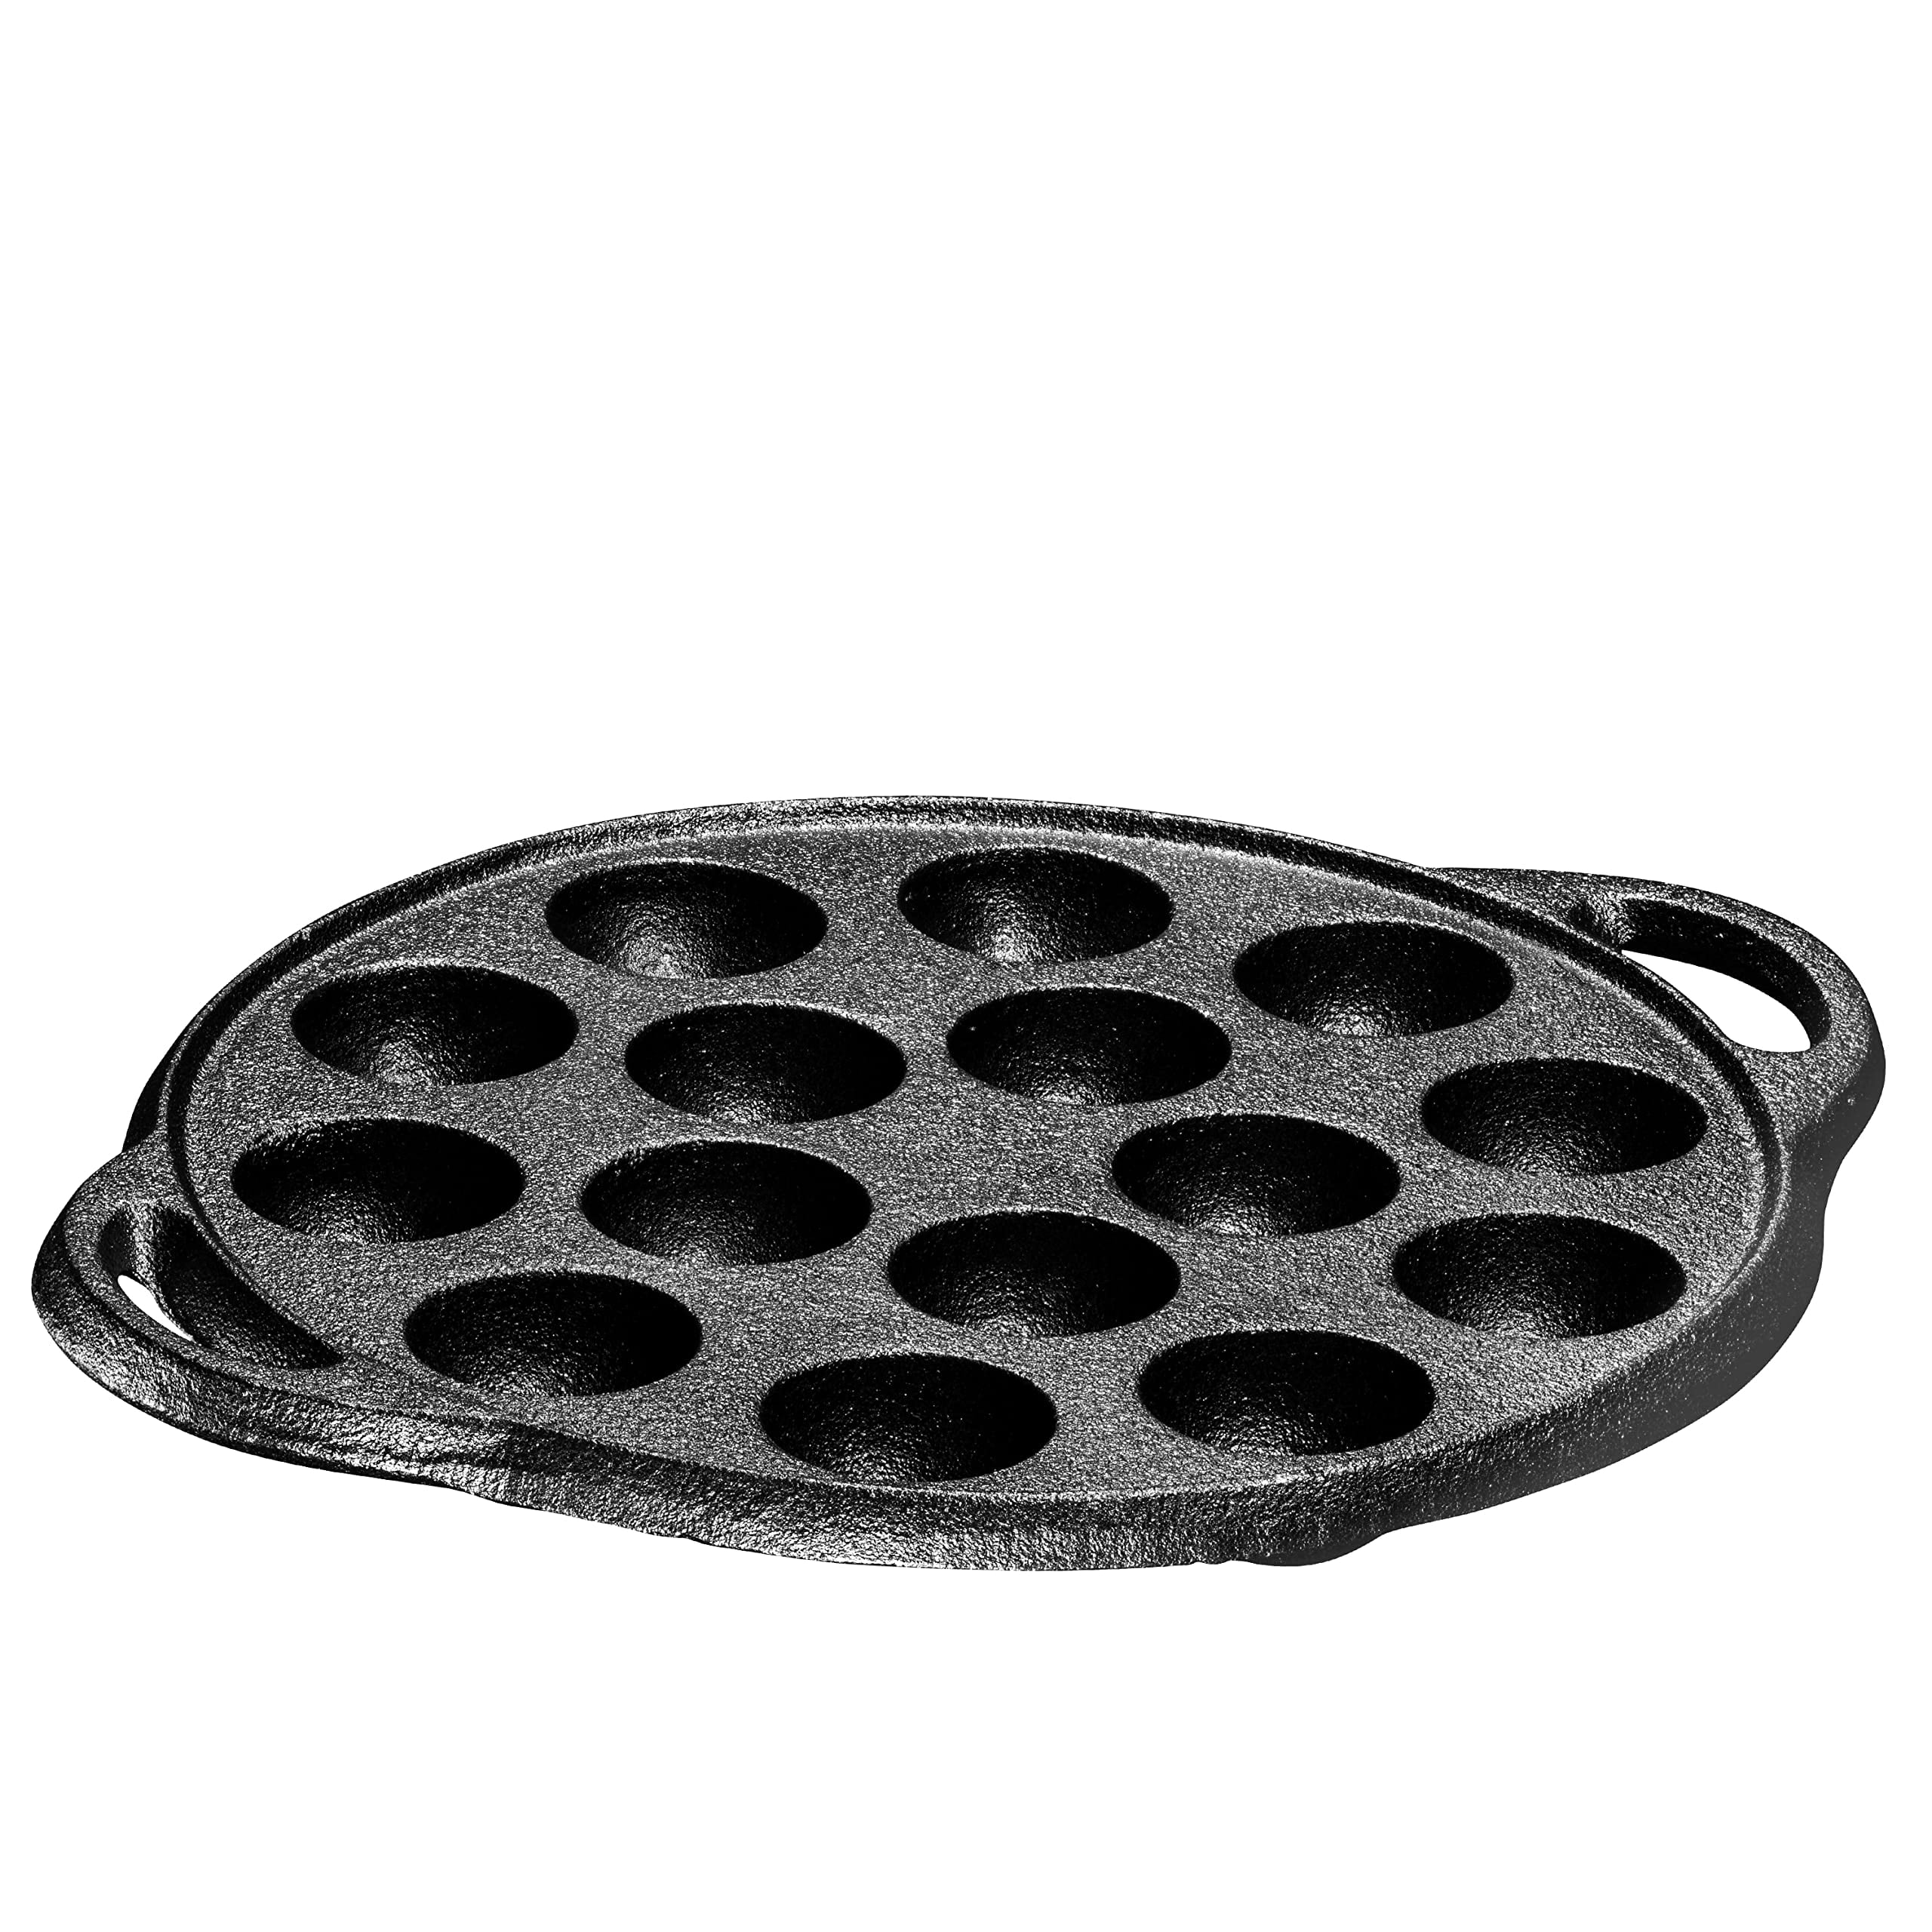  Lodge Cast Iron Mini Cake Pan. Pre-seasoned Cast Iron Cake Pan  for Baking Biscuits, Desserts, and Cupcakes.: Baking Sheets: Home & Kitchen